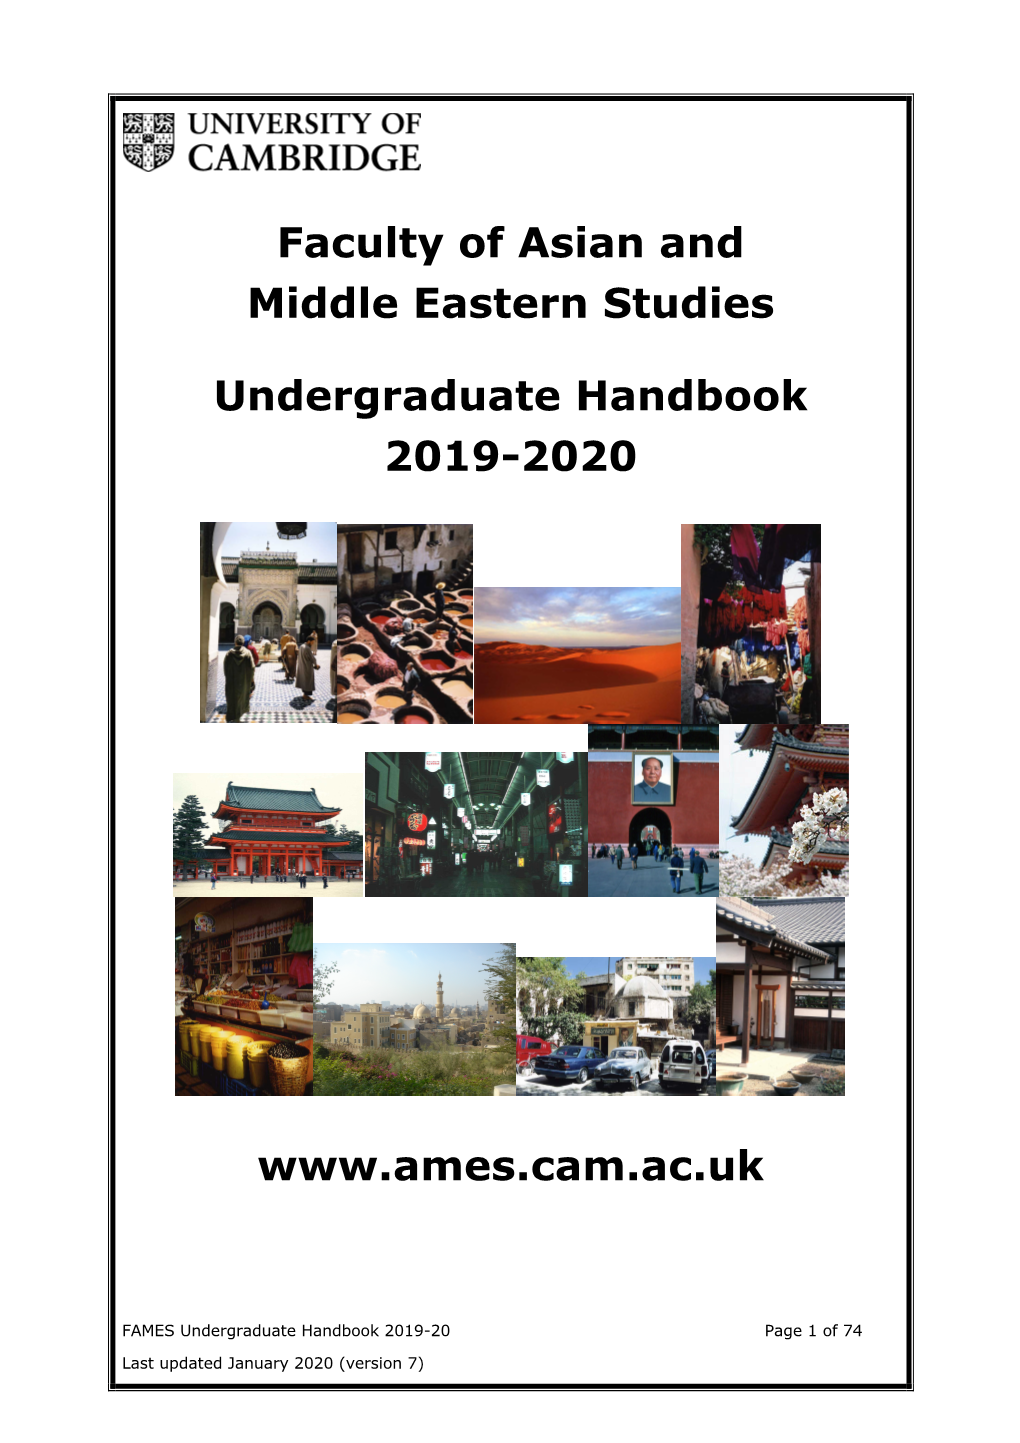 Faculty of Asian and Middle Eastern Studies Undergraduate Handbook